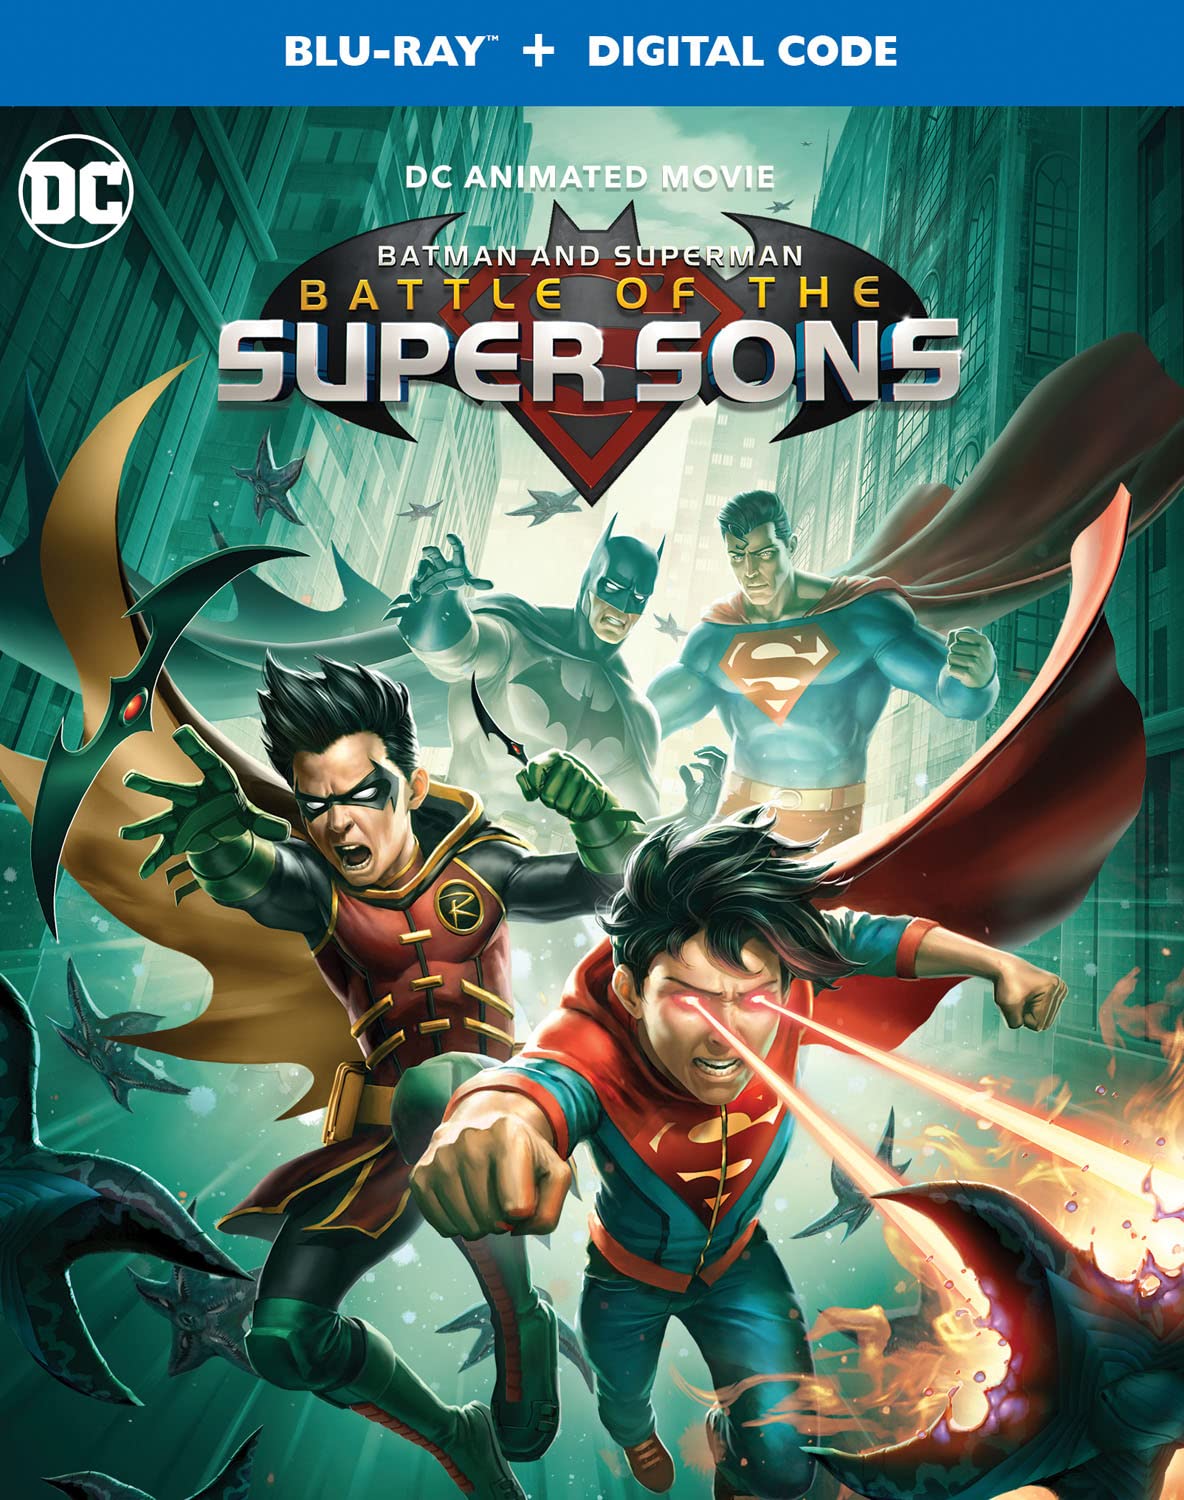 Batman And Superman: Battle Of The Super Sons - Blu-ray [ 2022 ]  - Animation Movies On Blu-ray - Movies On GRUV